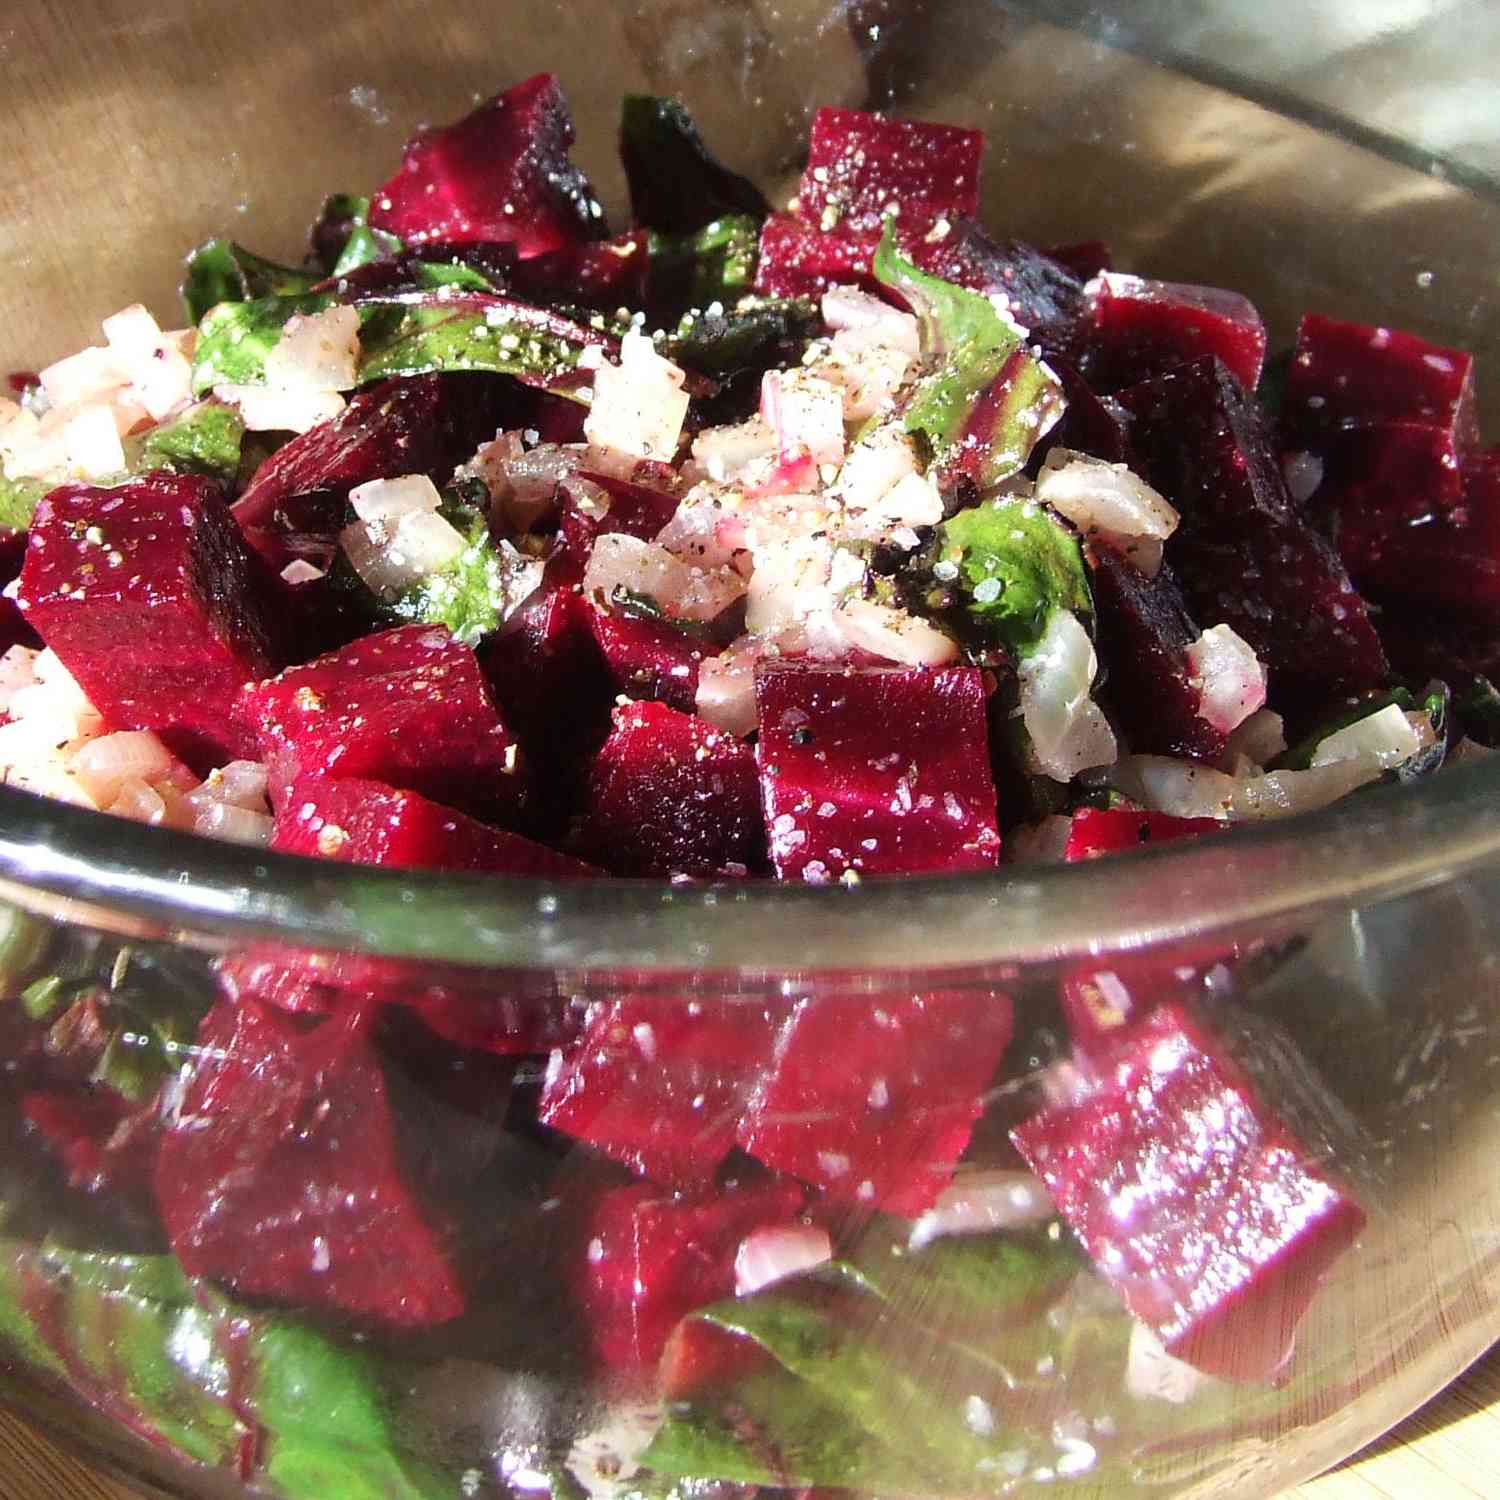 close up view of Roasted Beets and Sauteed Beet Greens with onions in a glass bowl